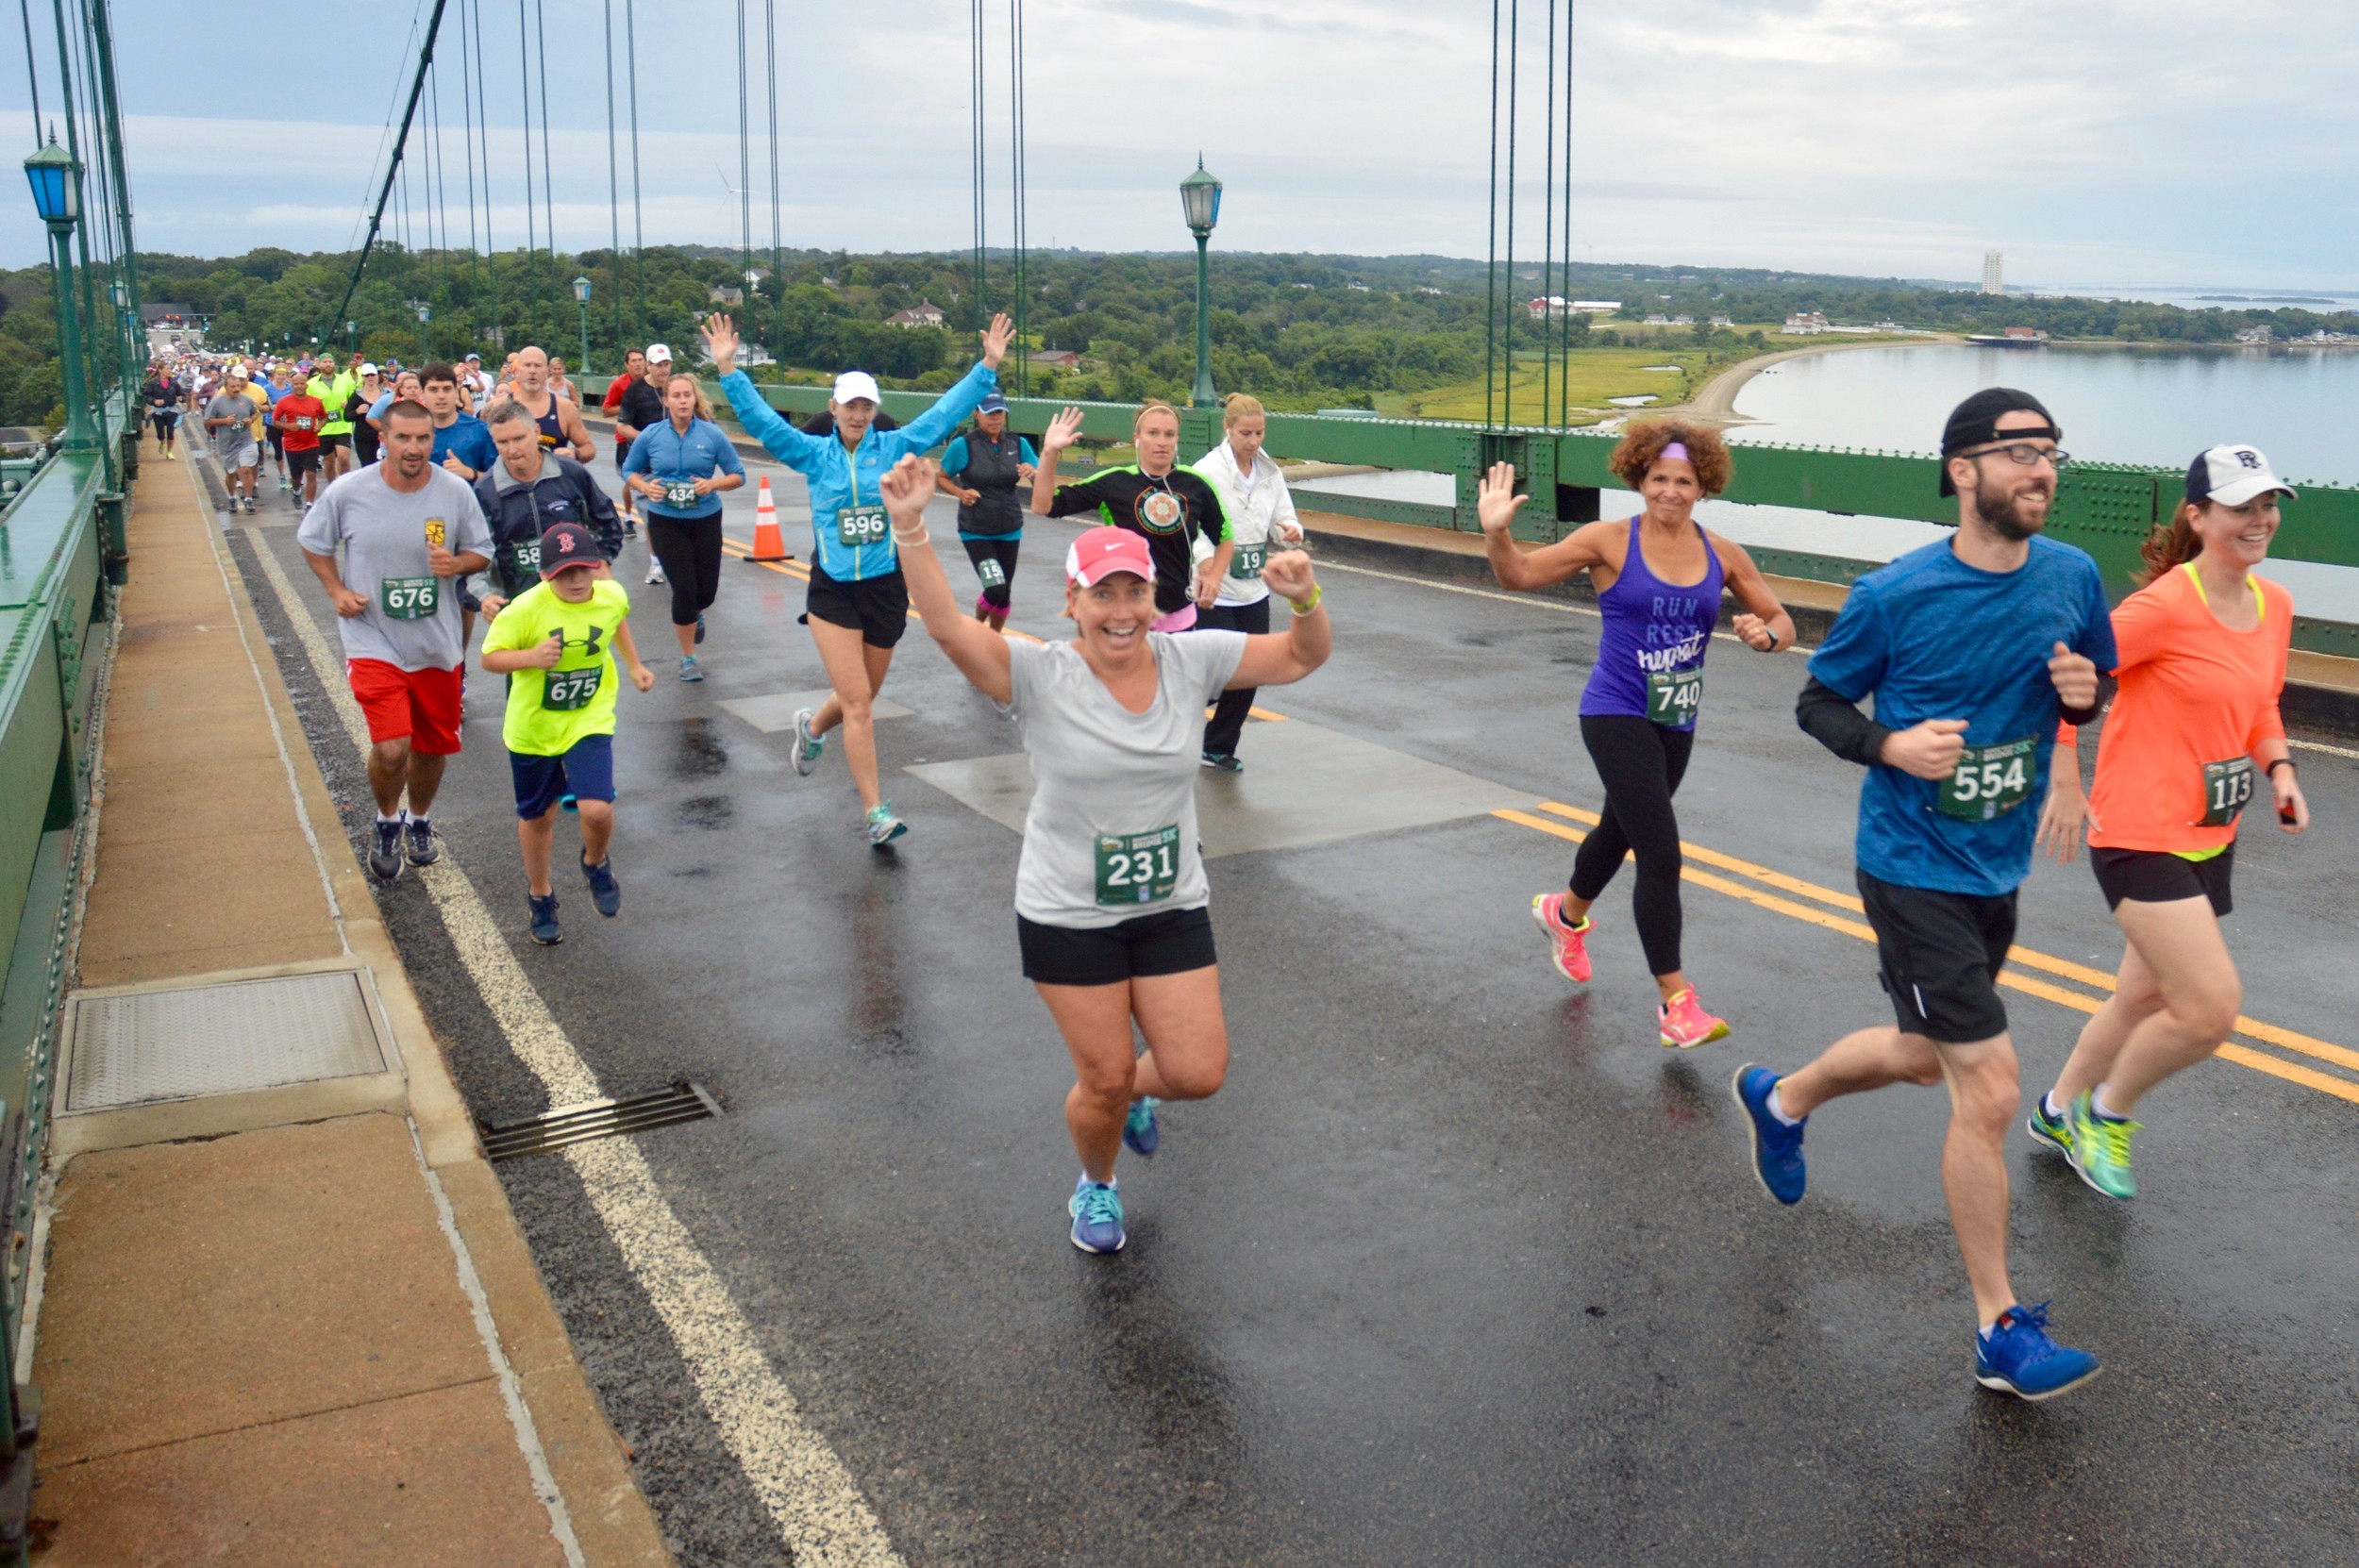 Runners head over to Bristol during the inaugural Mt. Hope Bridge 5K Road Race. Portsmouth is in the background, with the Carnegie Abbey Tower seen in the distance at right.